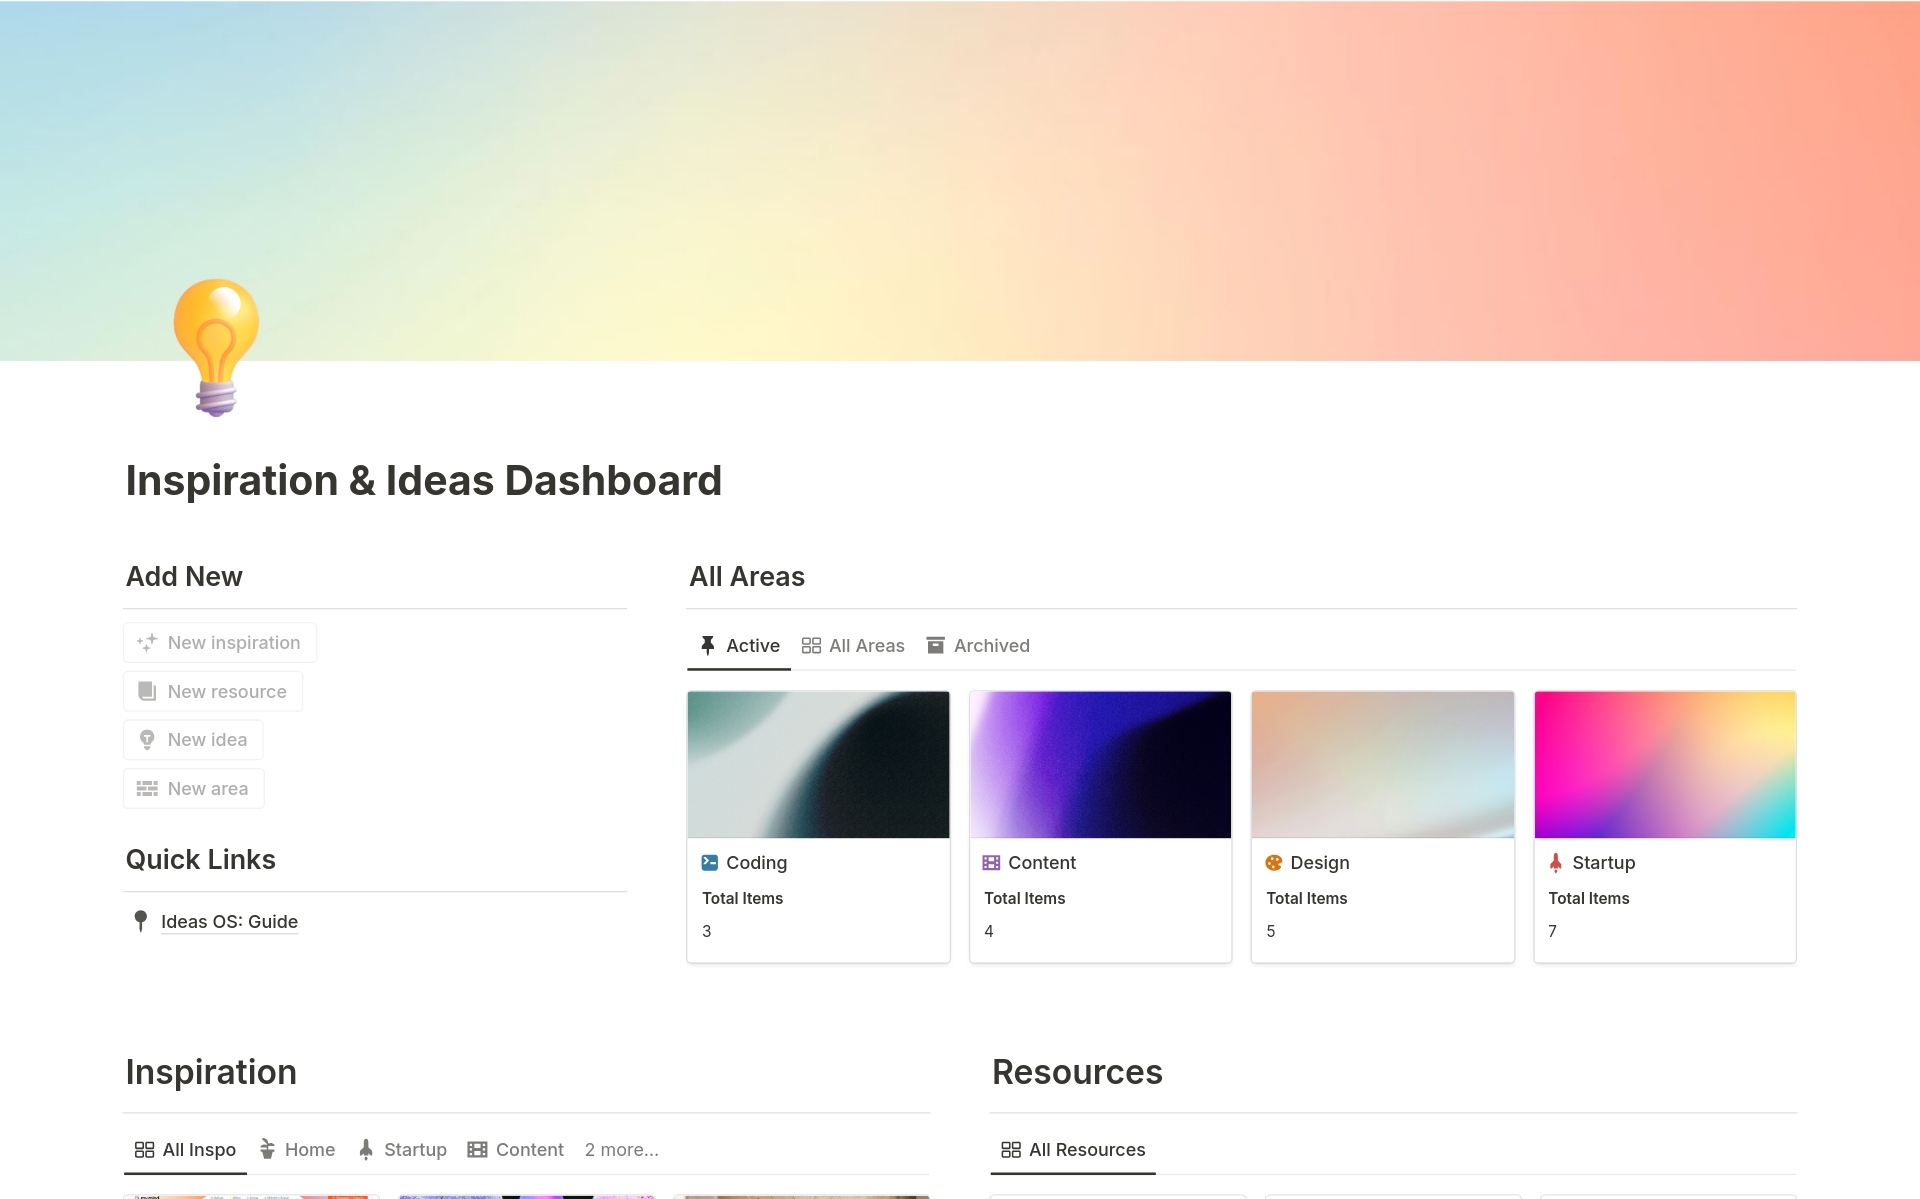 Idea OS, an ideas and inspiration dashboard, is for the ultimate hobbyist or the multi-disciplinary creative. Use this dashboard to keep track all of your ideas, inspiration and resources that help you create wonderful things. ✨